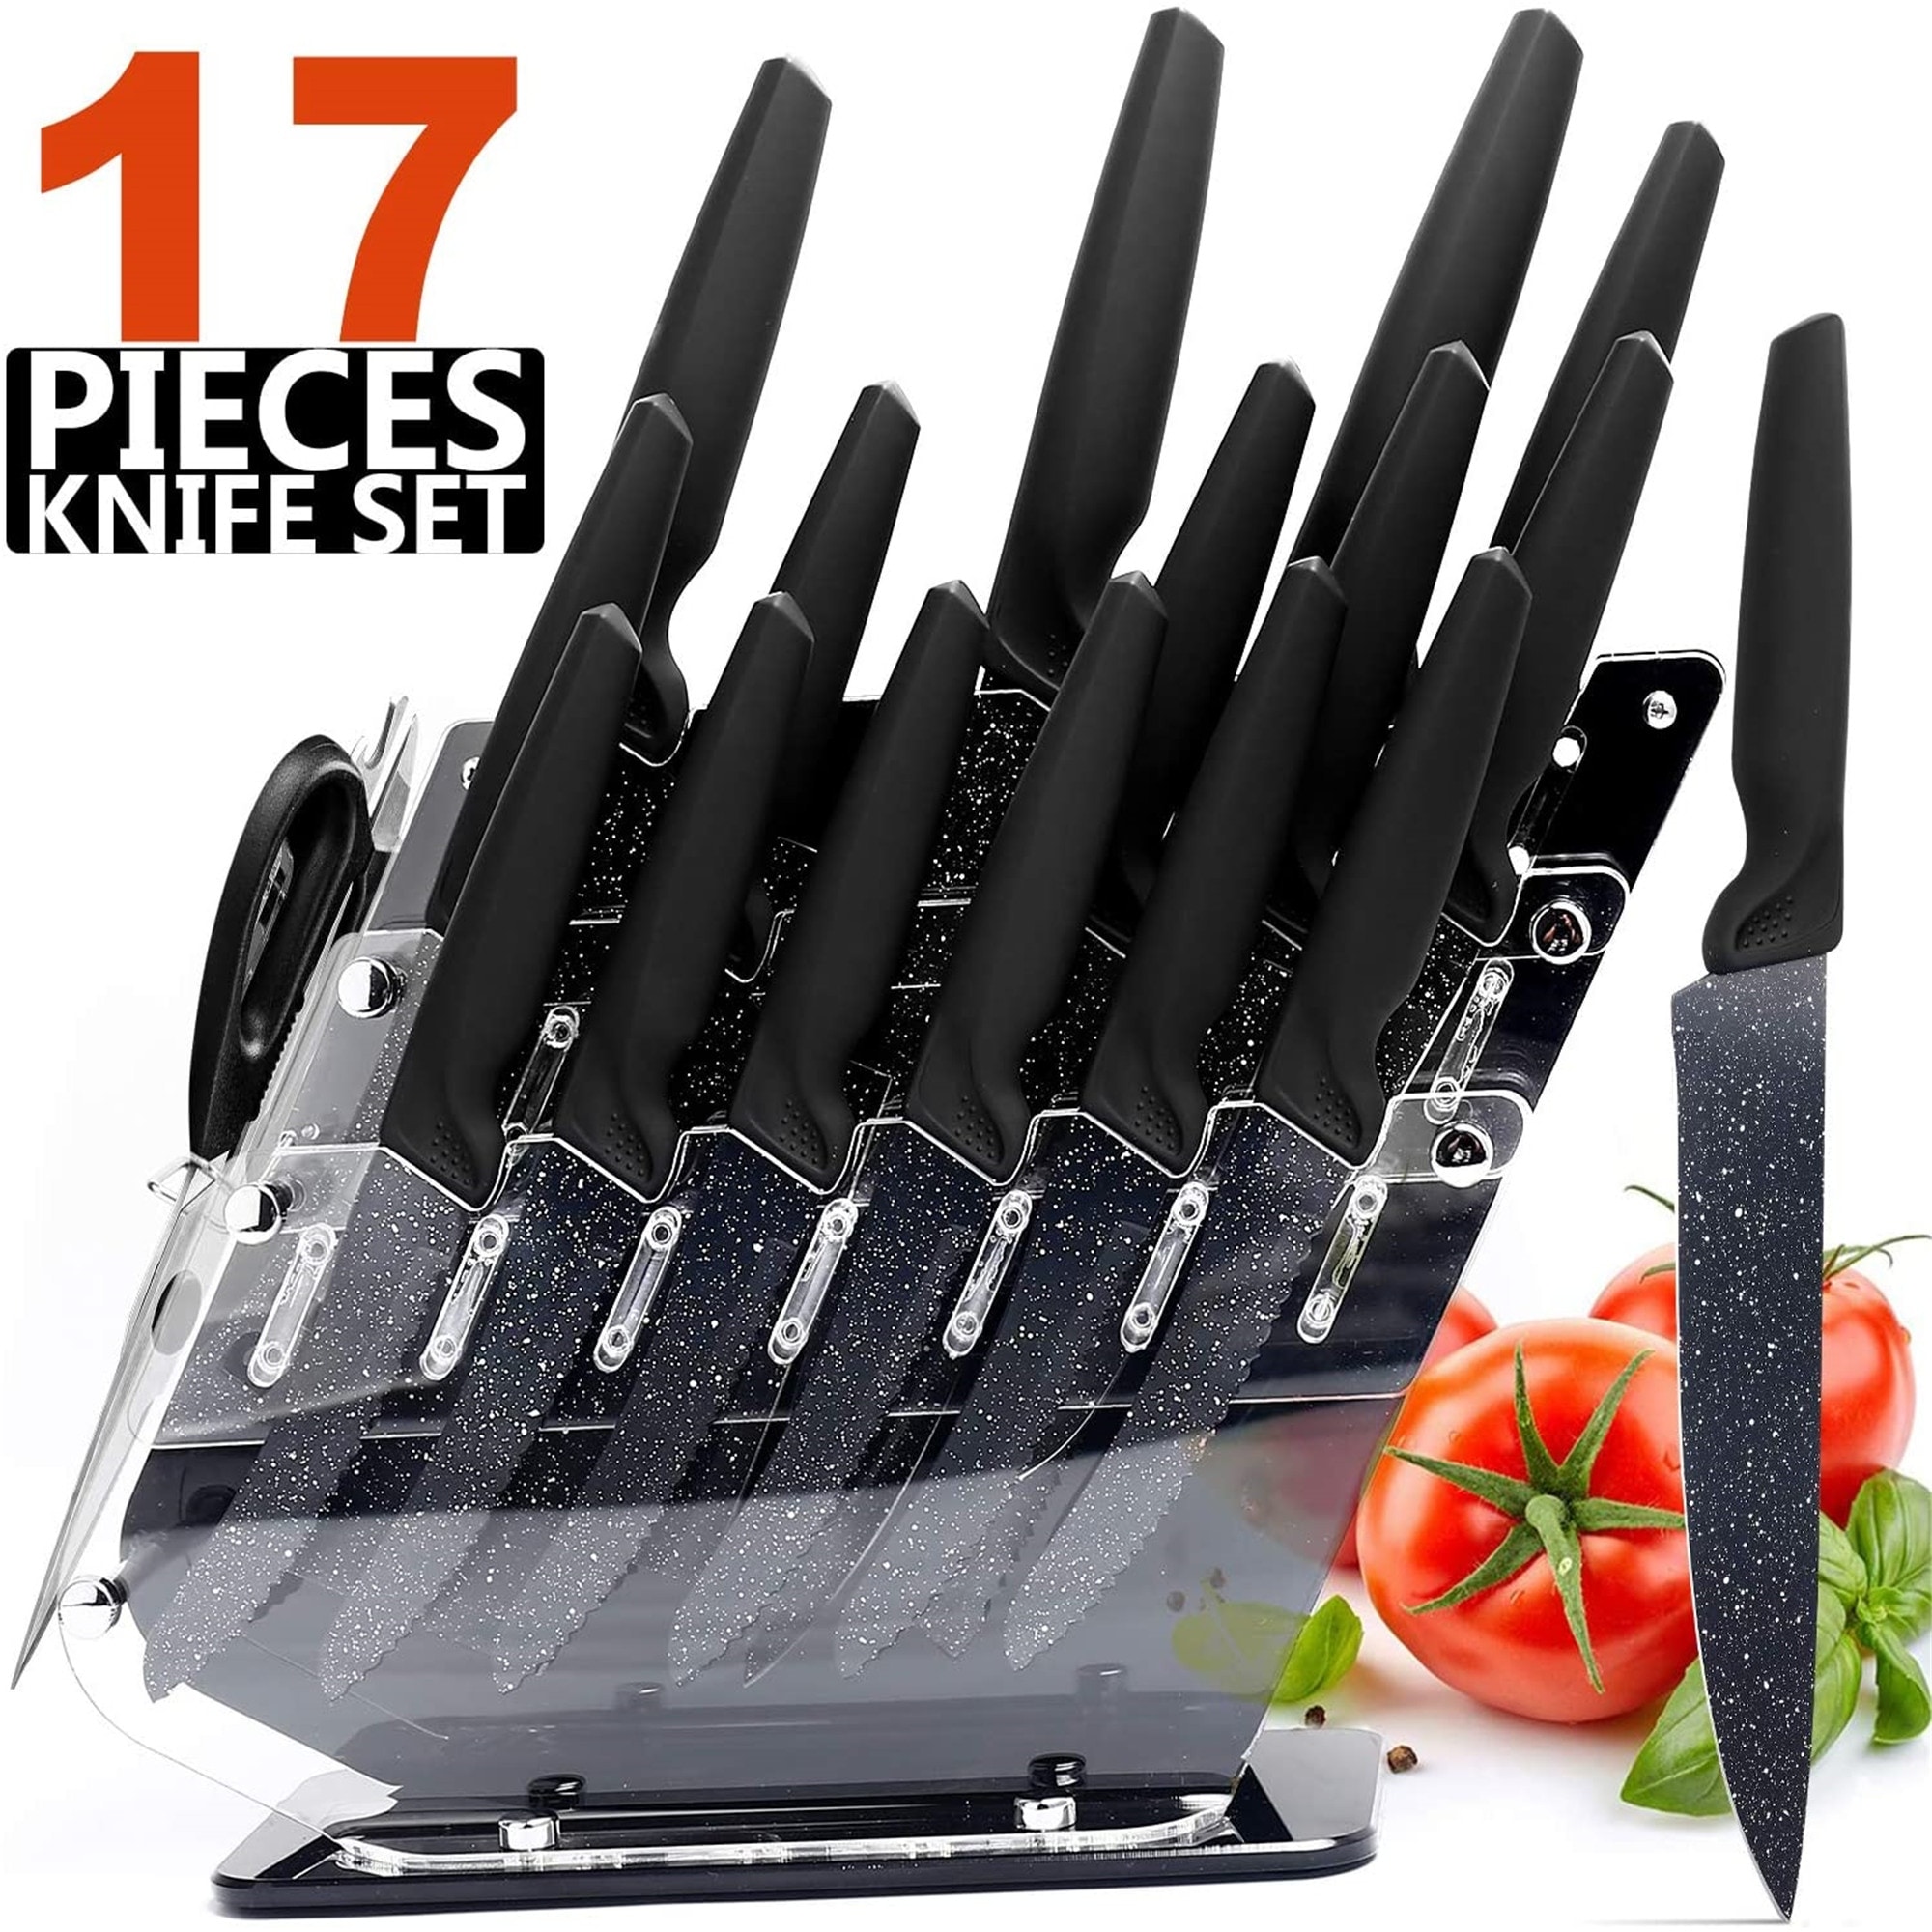 https://ak1.ostkcdn.com/images/products/is/images/direct/a648e670b319b217a188146fd7949b5d153eb9c8/Knife-Set%2C-17Pcs-German-Stainless-Steel-Chef-Knife-Set-with-Acrylic-Block%2C-6-Steak-Knives%2C-Professional-Non-Slip-Handle%2C.jpg